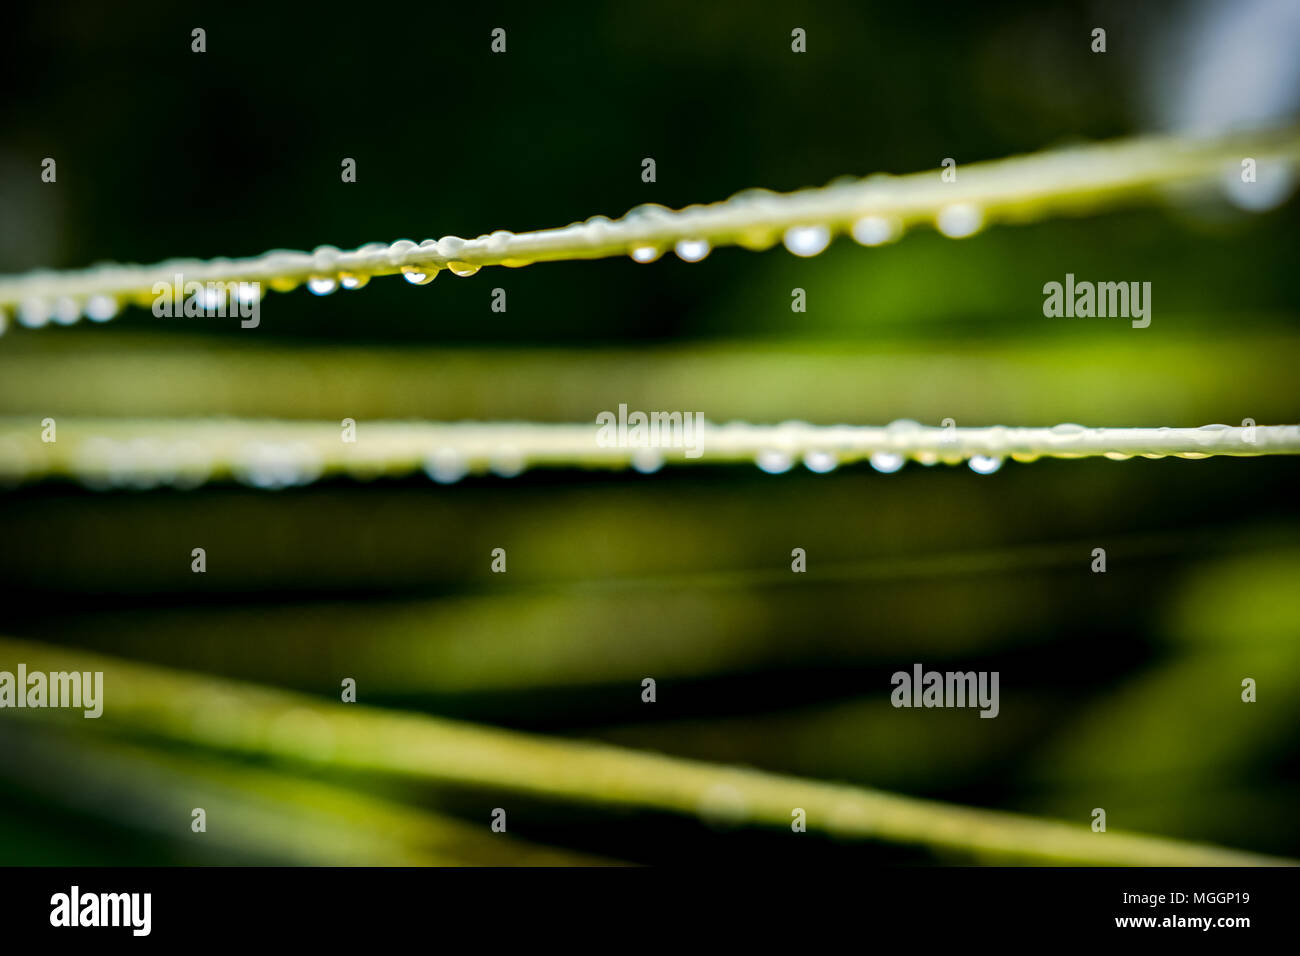 Close-up, shallow focus of water droplets seen on a plastic clothes line. Seen after a heavy downpour during late afternoon in spring. Stock Photo